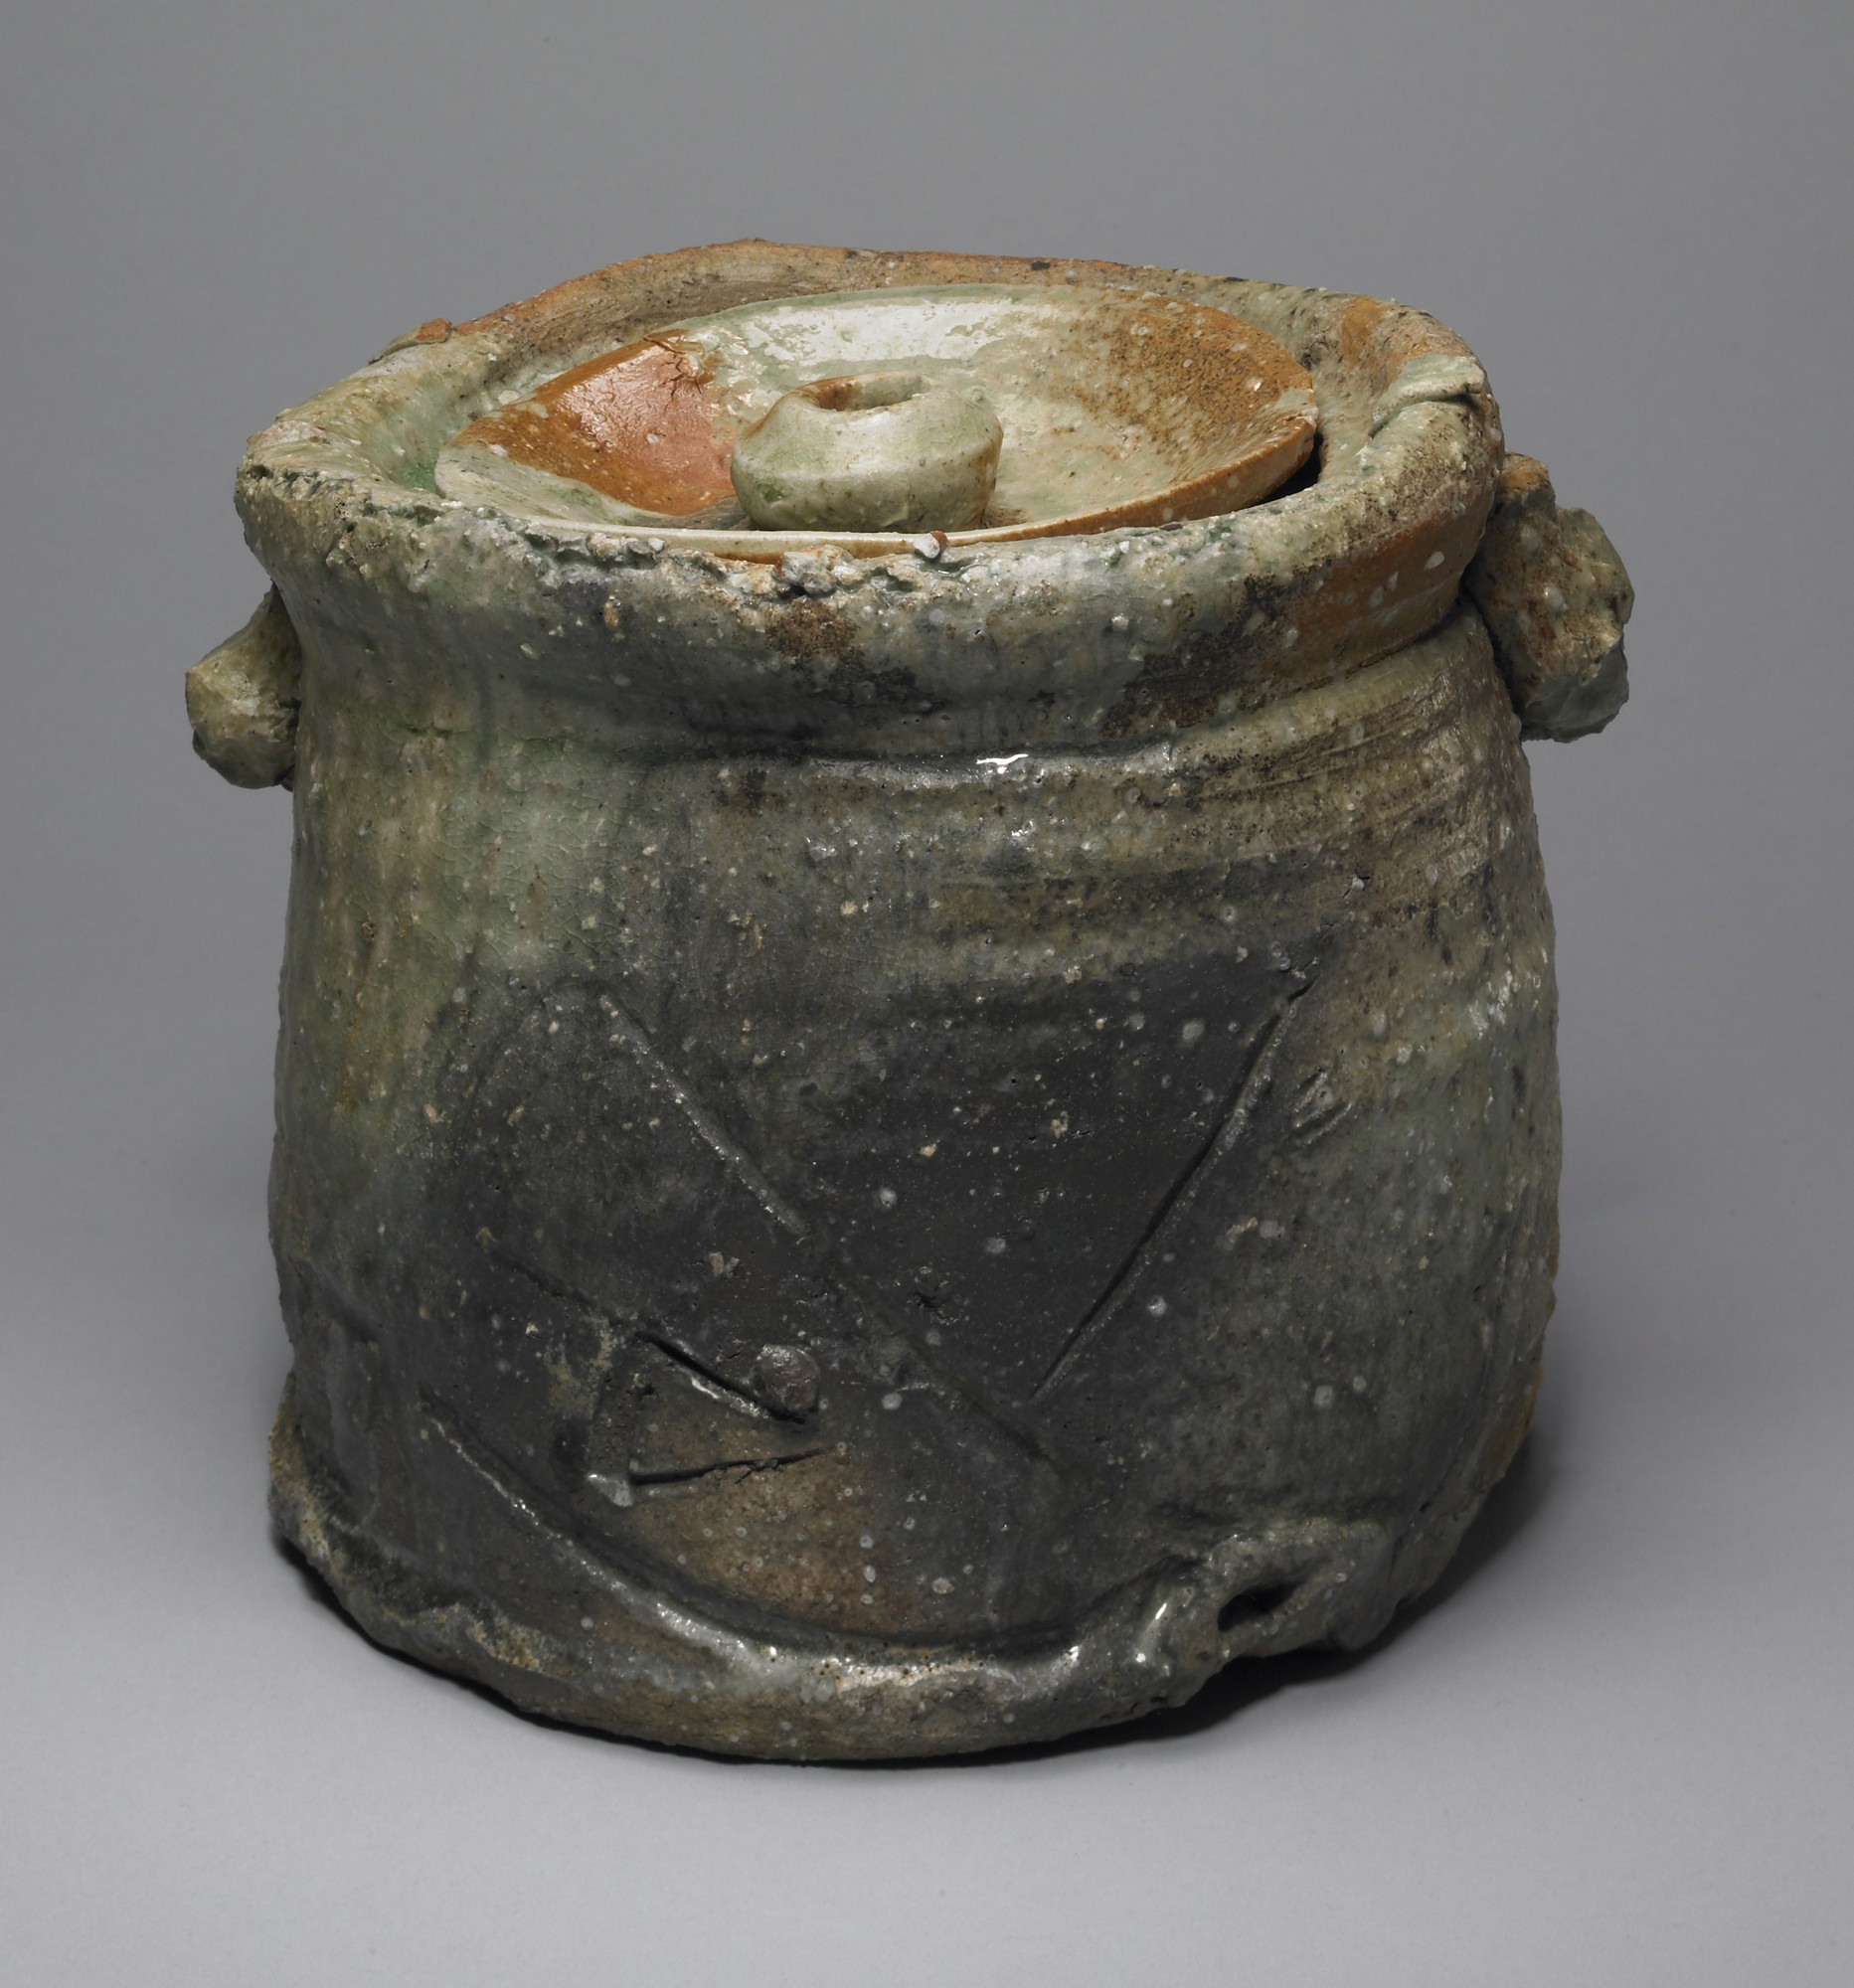 Container for fresh water (mizusashi) (2008-29 a-b)